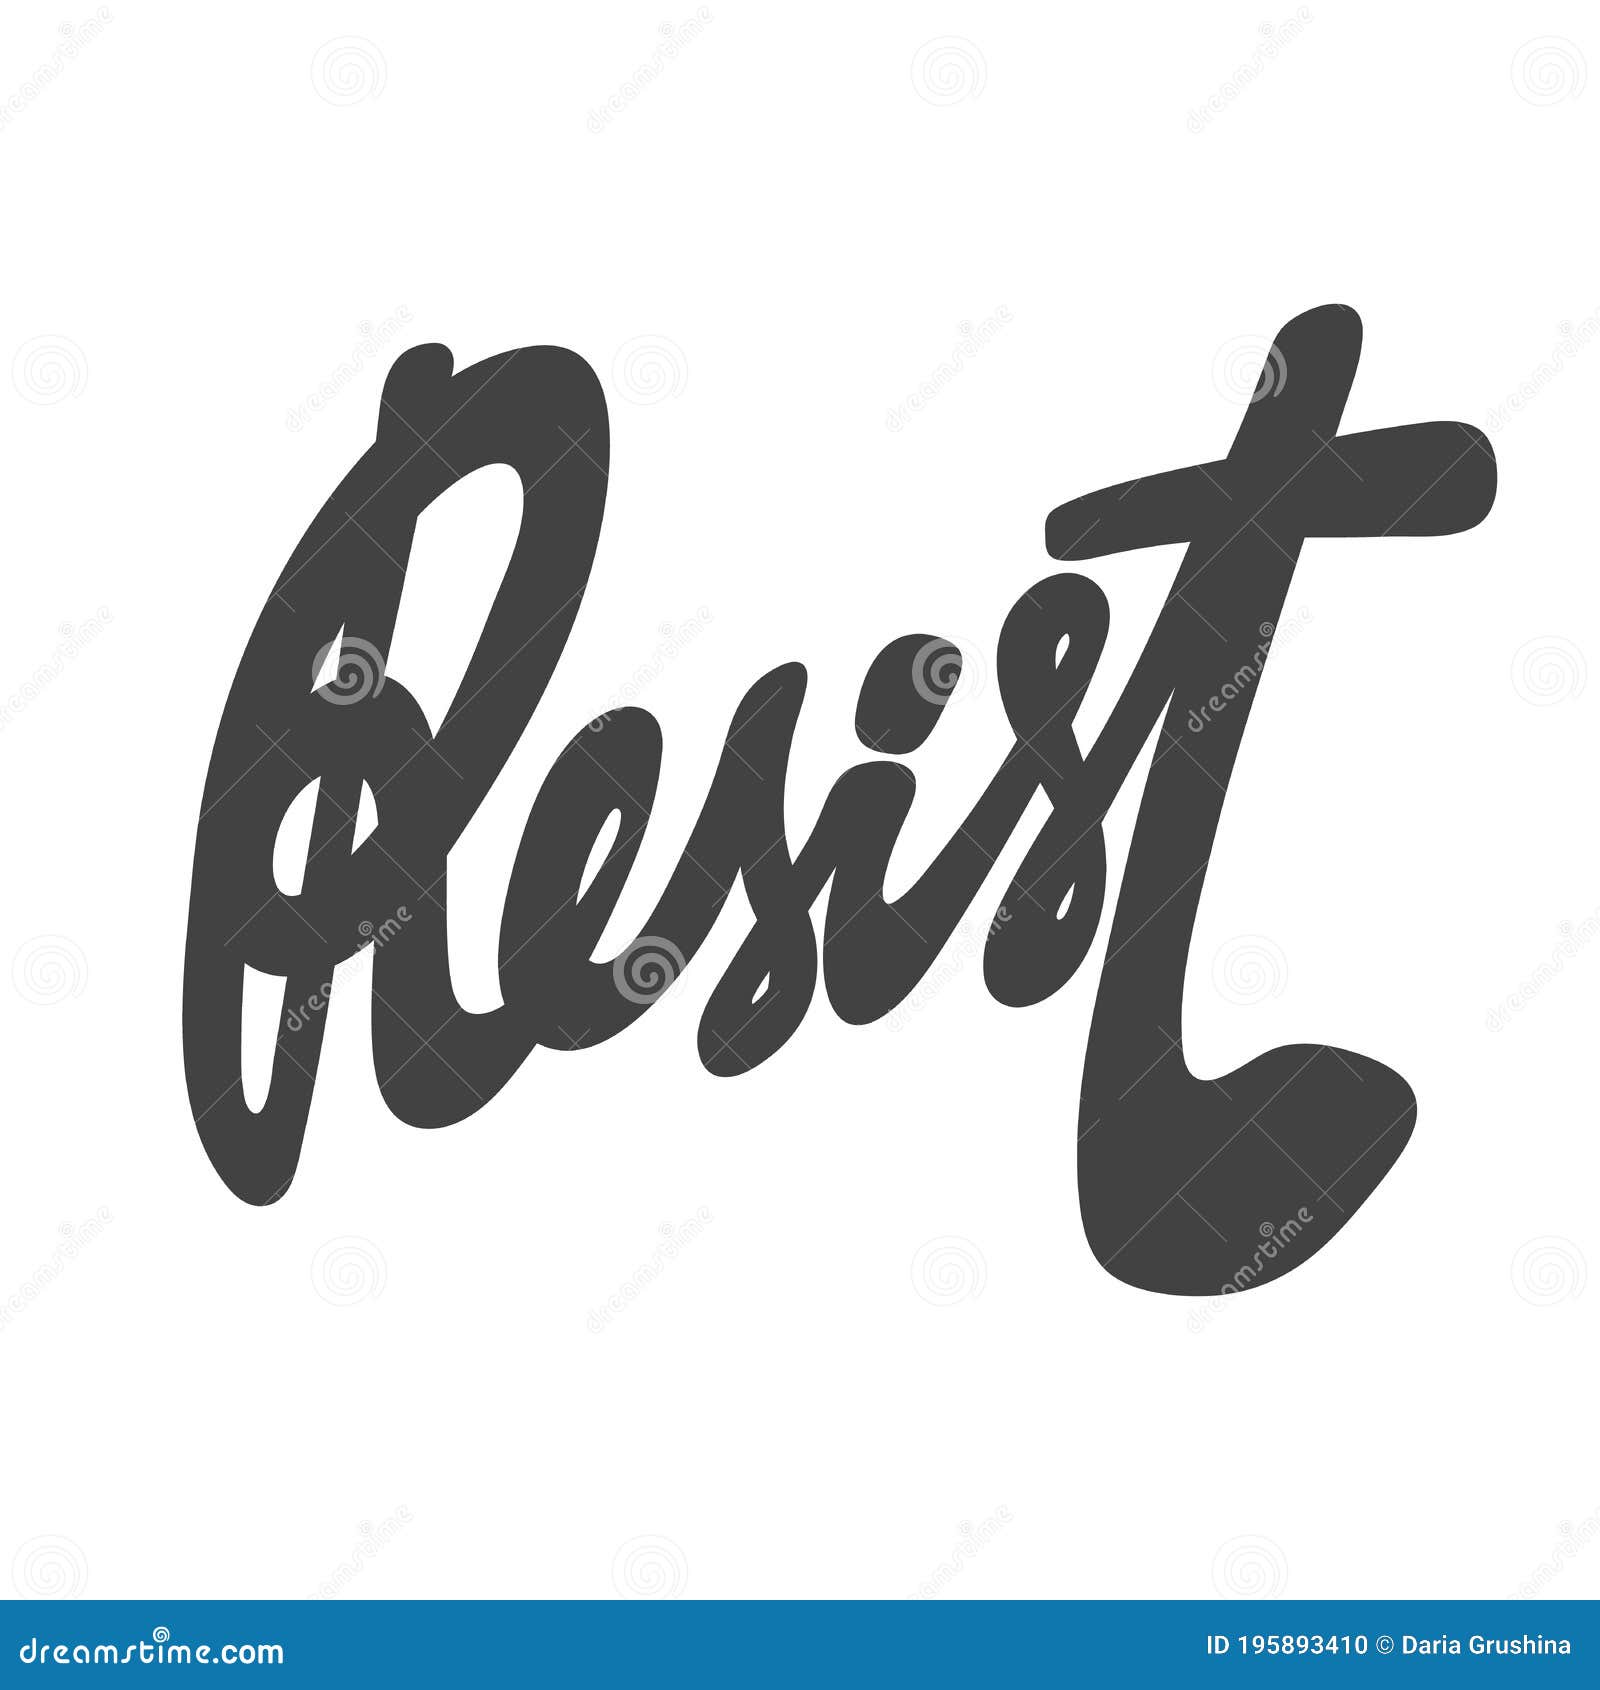 Resist Vector Hand Drawn Calligraphic Design Poster Good For Wall Art 